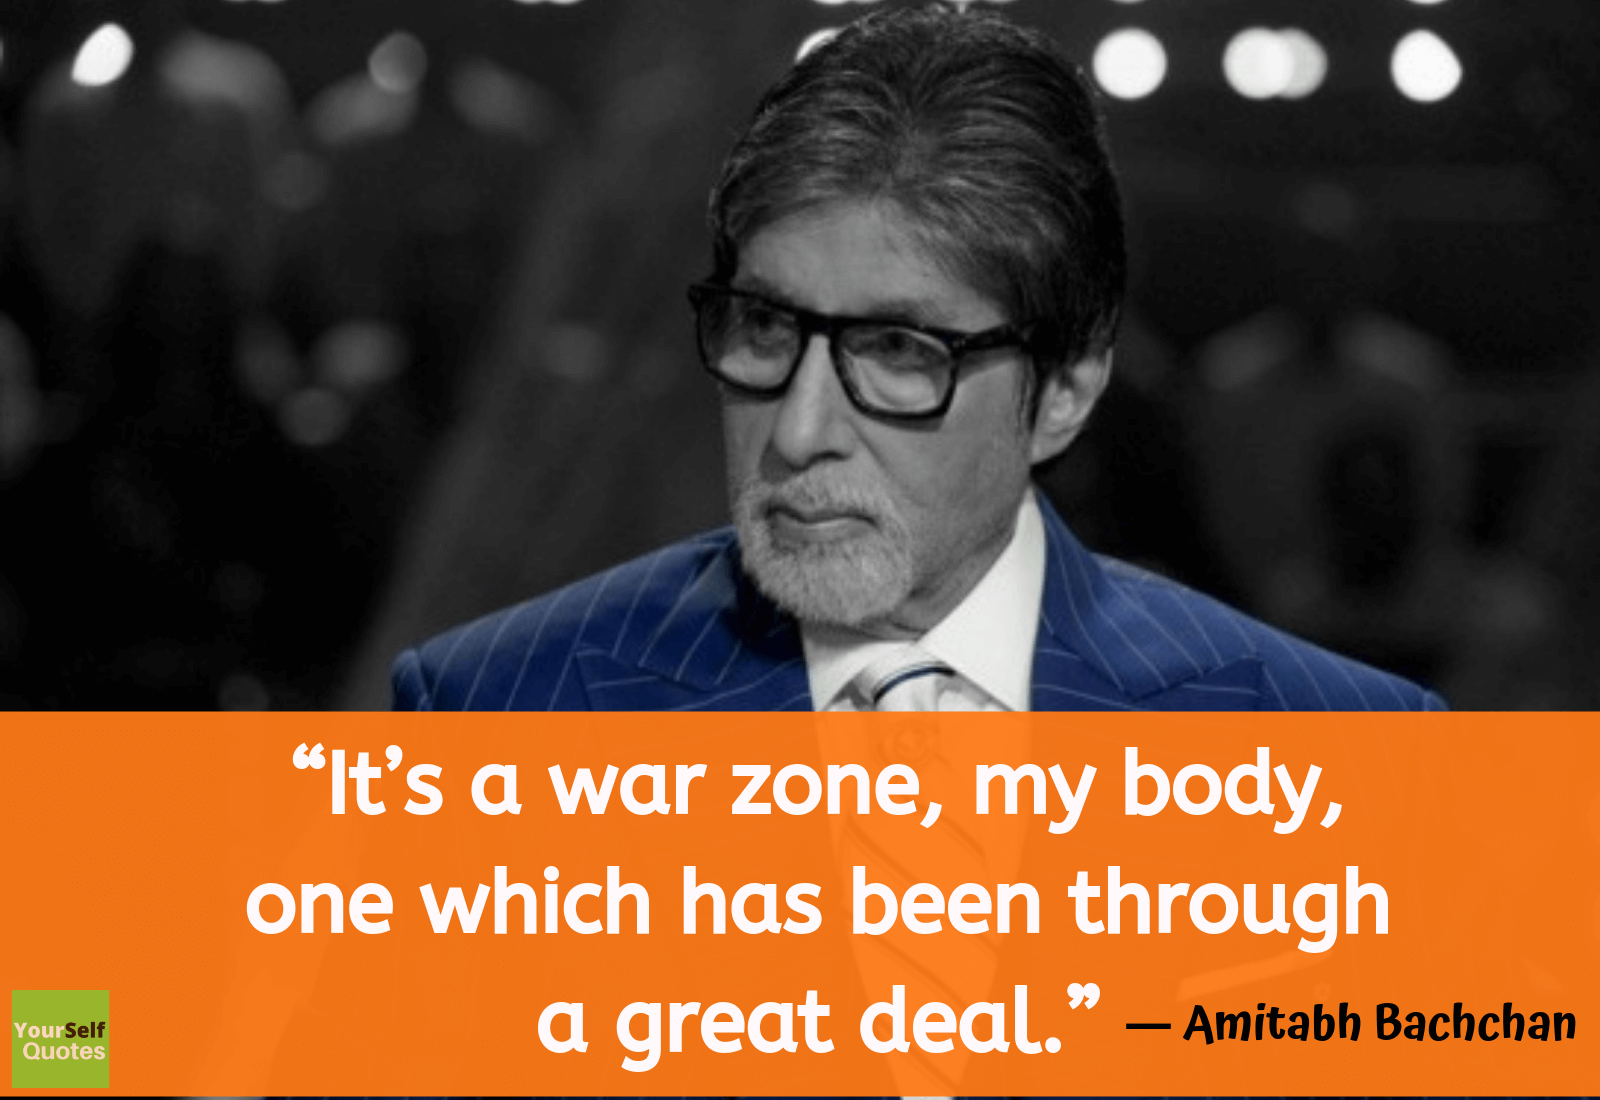 Amitabh Bachchan Quotes Images